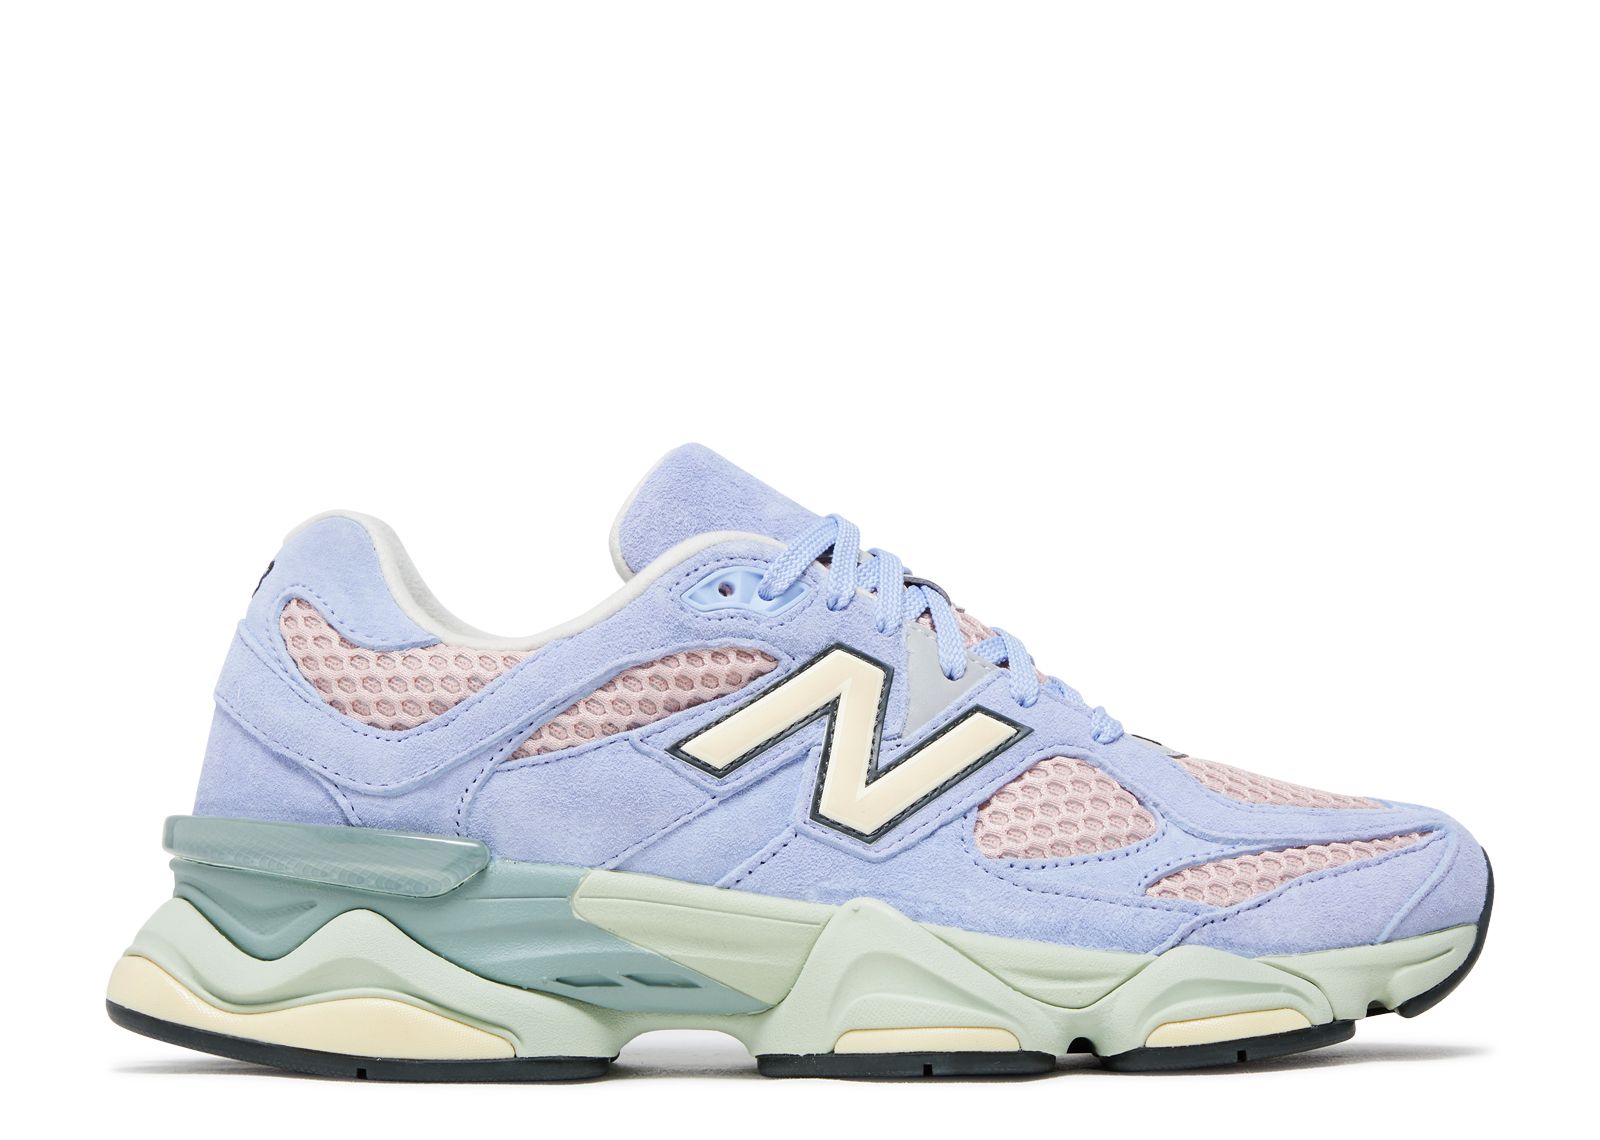 Кроссовки New Balance The Whitaker Group X 9060 'Missing Pieces Pack - Daydream Blue', синий west carly anne missing pieces